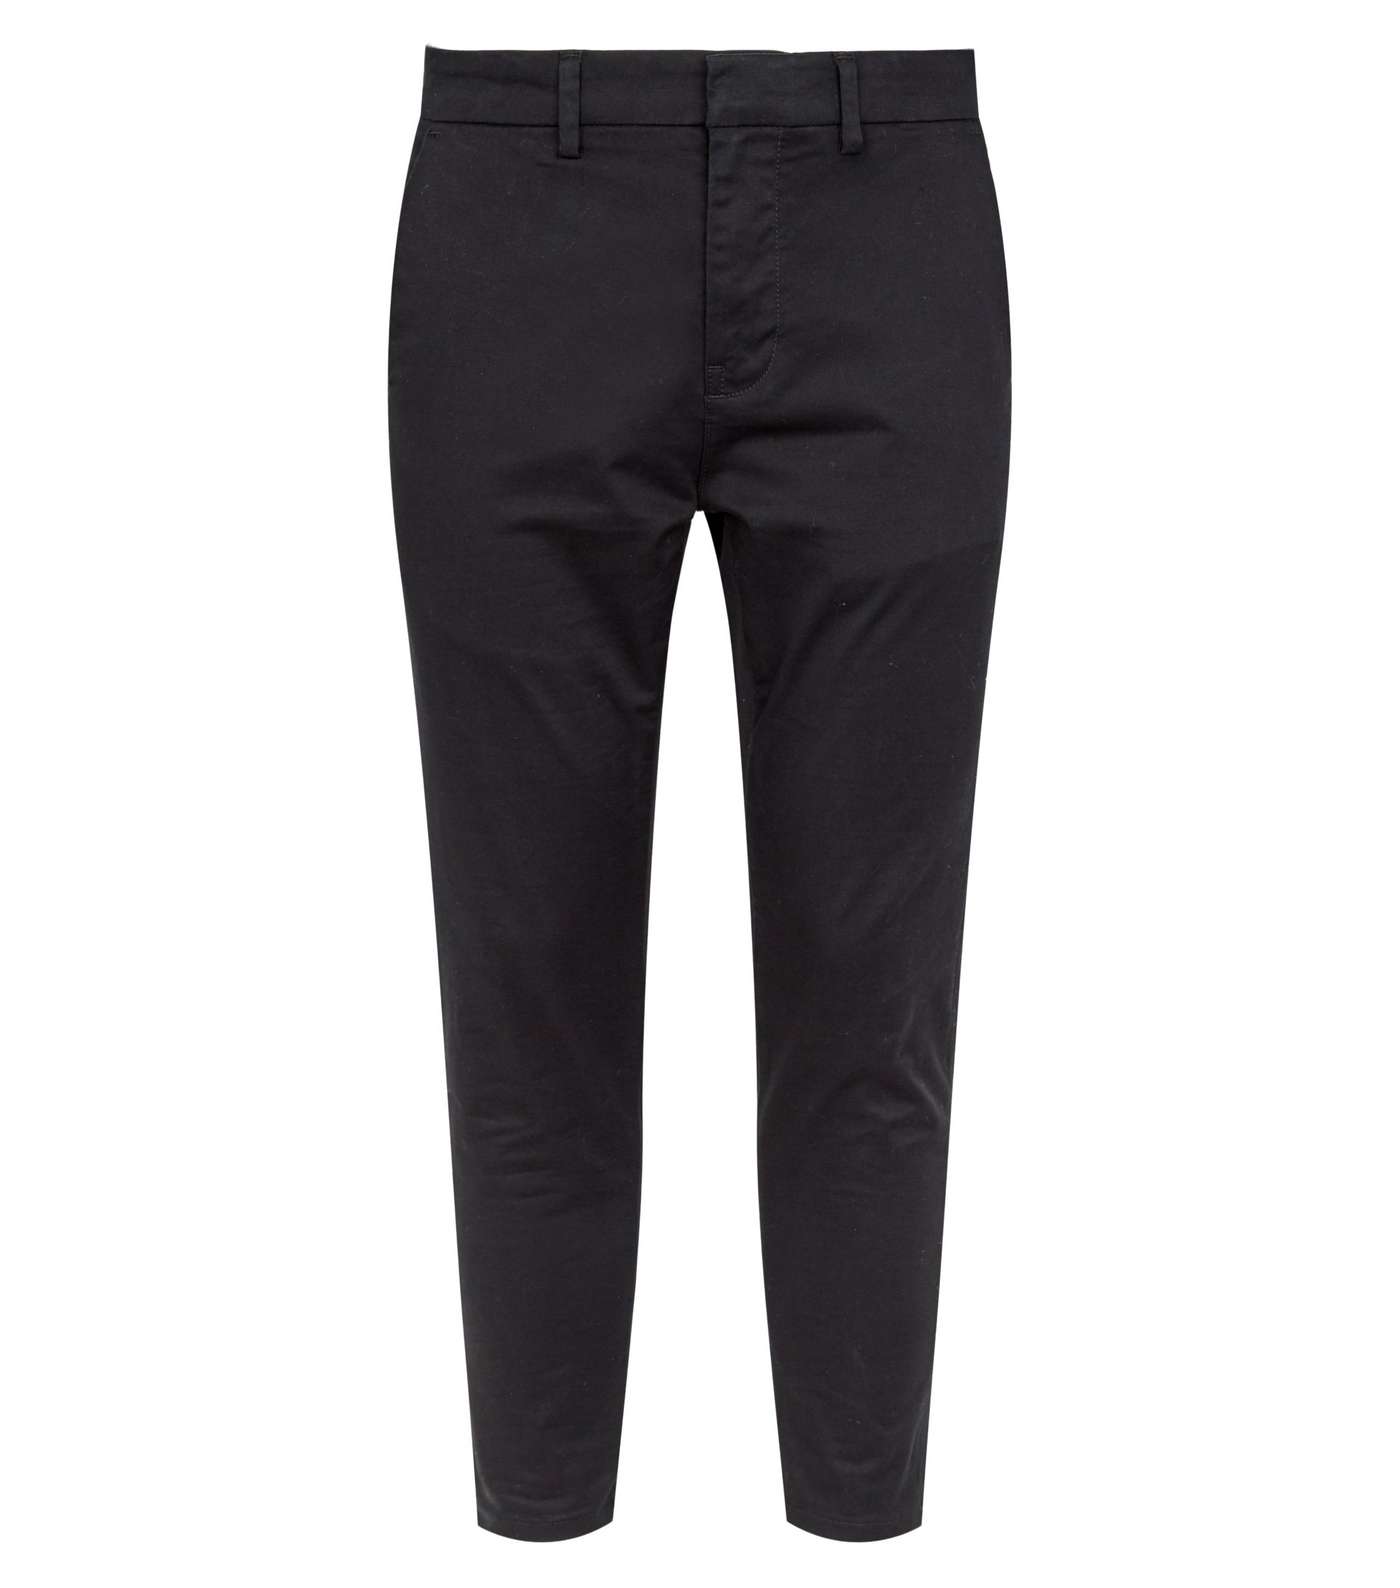 Black Skinny Stretch Cropped Trousers Image 5